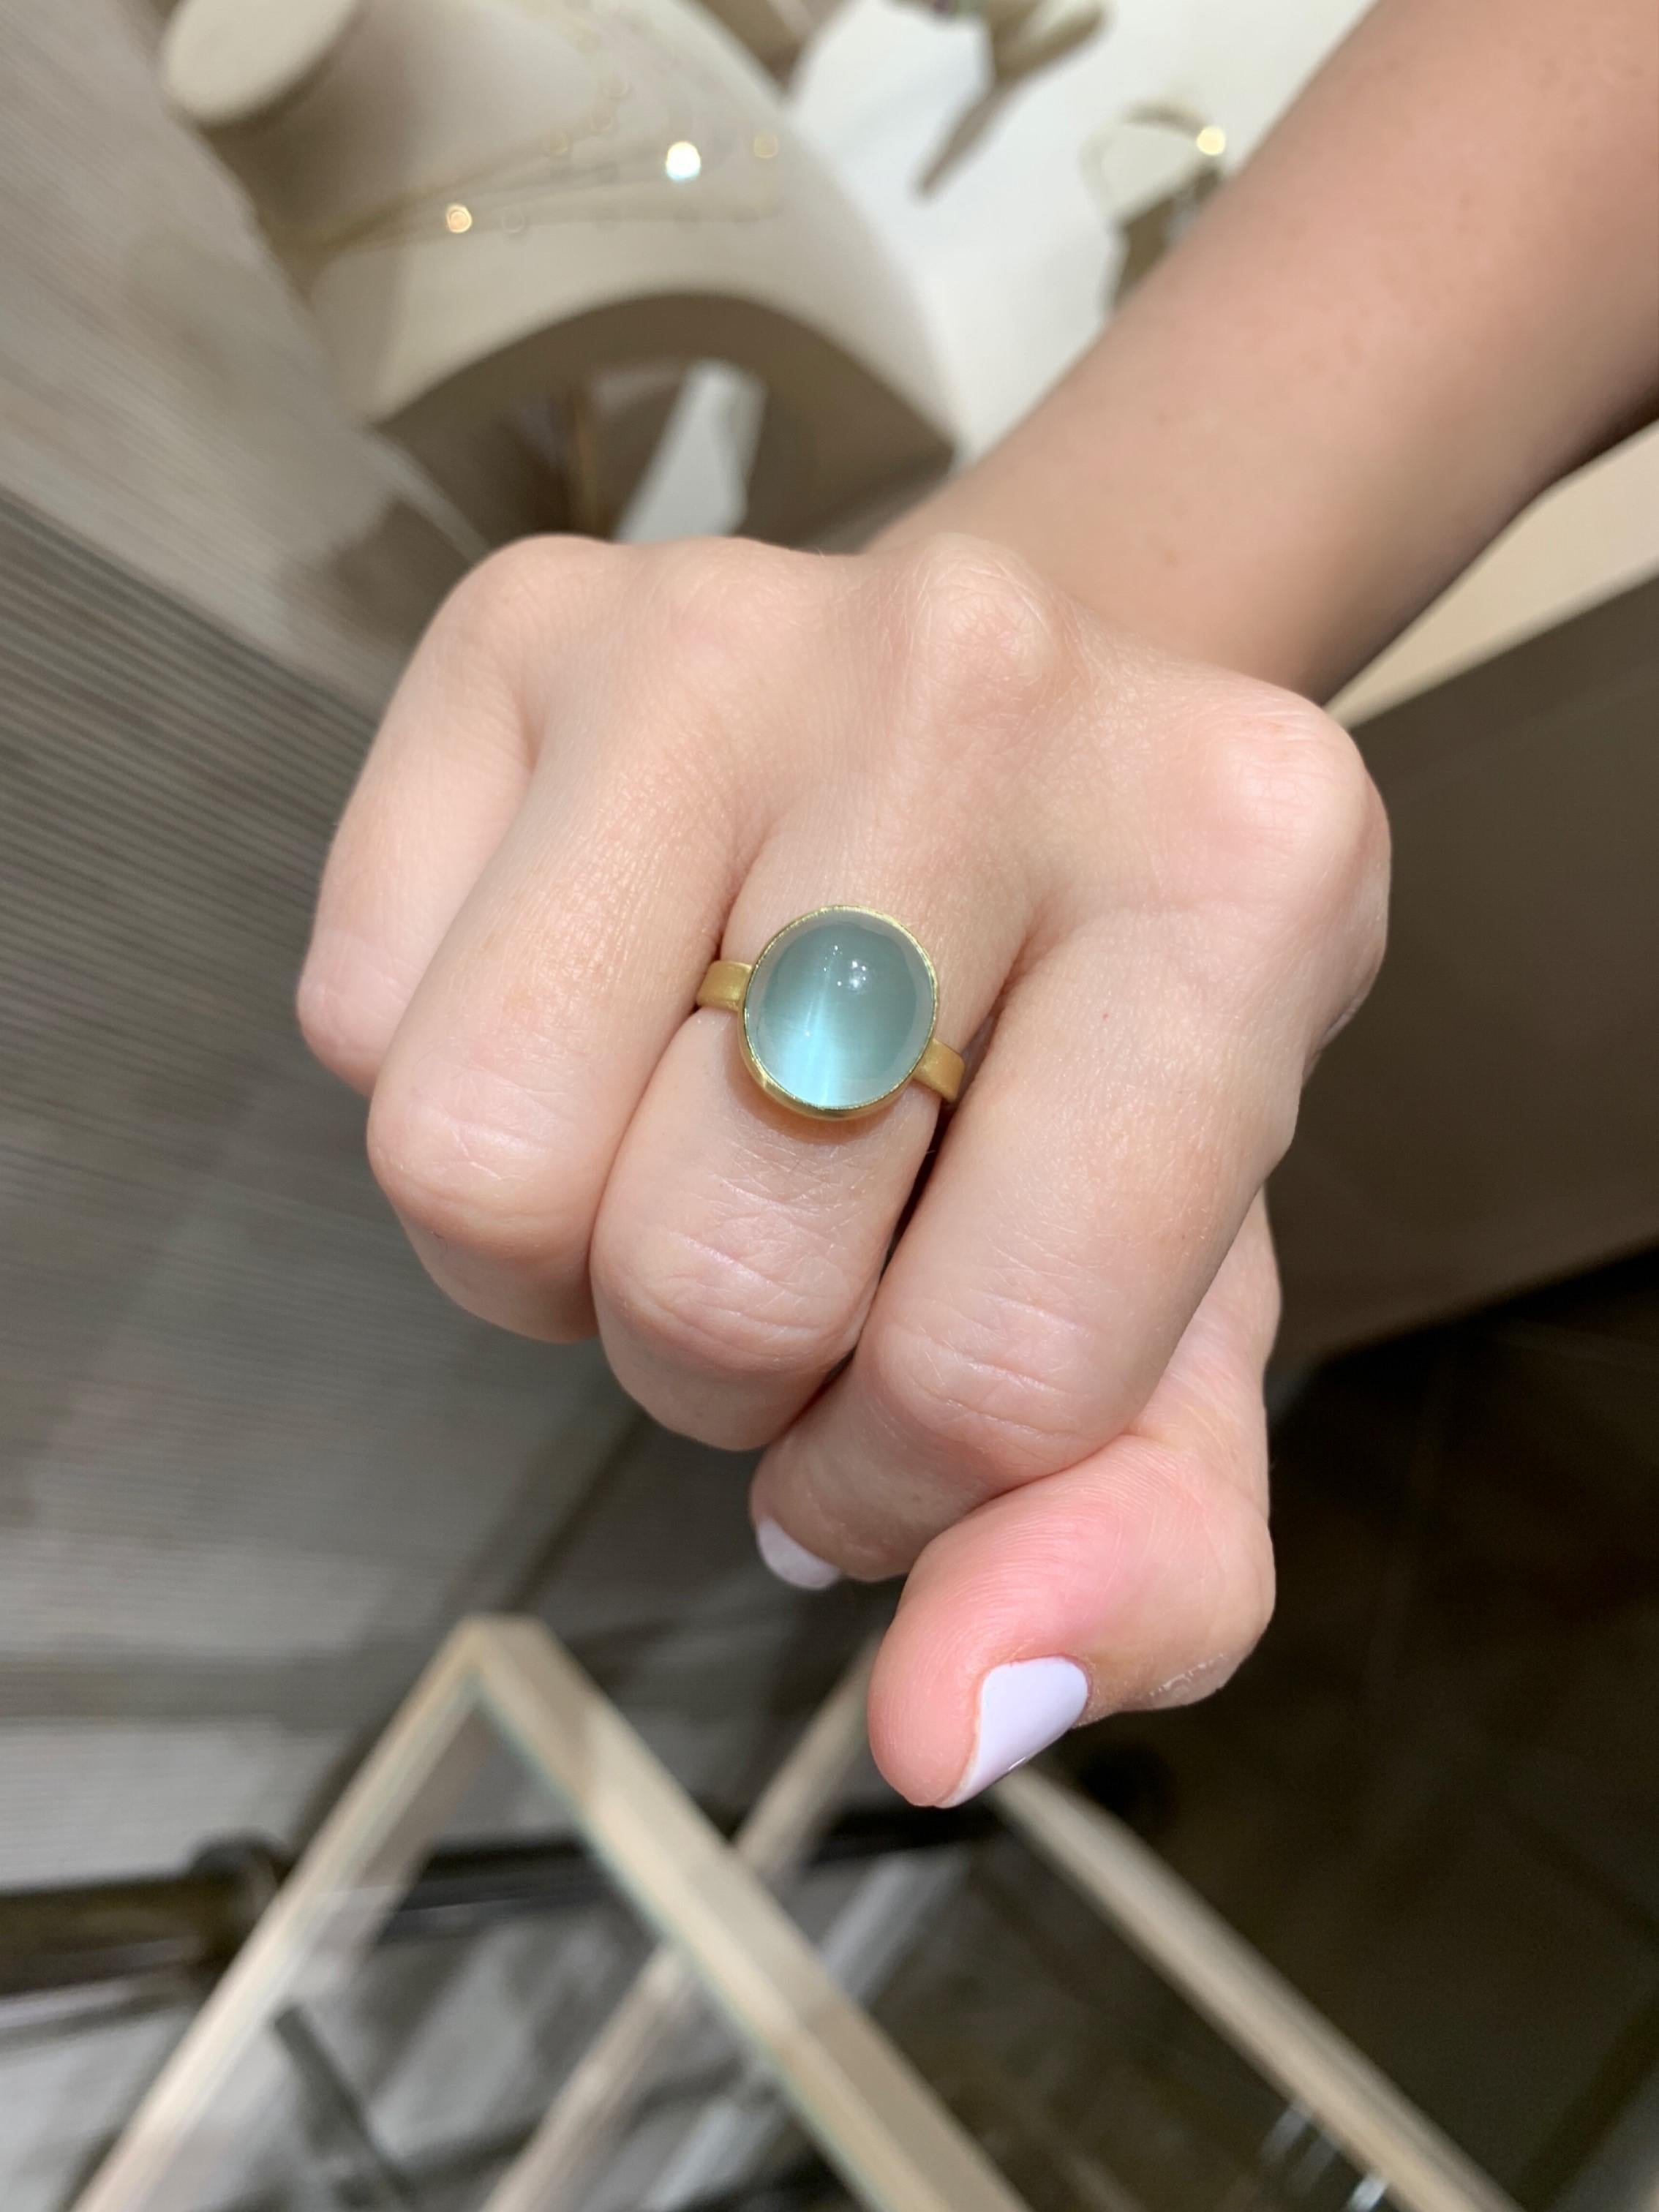 One of a kind ring hand-fabricated by acclaimed jewelry artist Monica Marcella in the maker's signature-finished 18k yellow gold showcasing a magical sky blue natural aquamarine cabochon with cat's-eye optical effect. Size 7 (can be sized upon